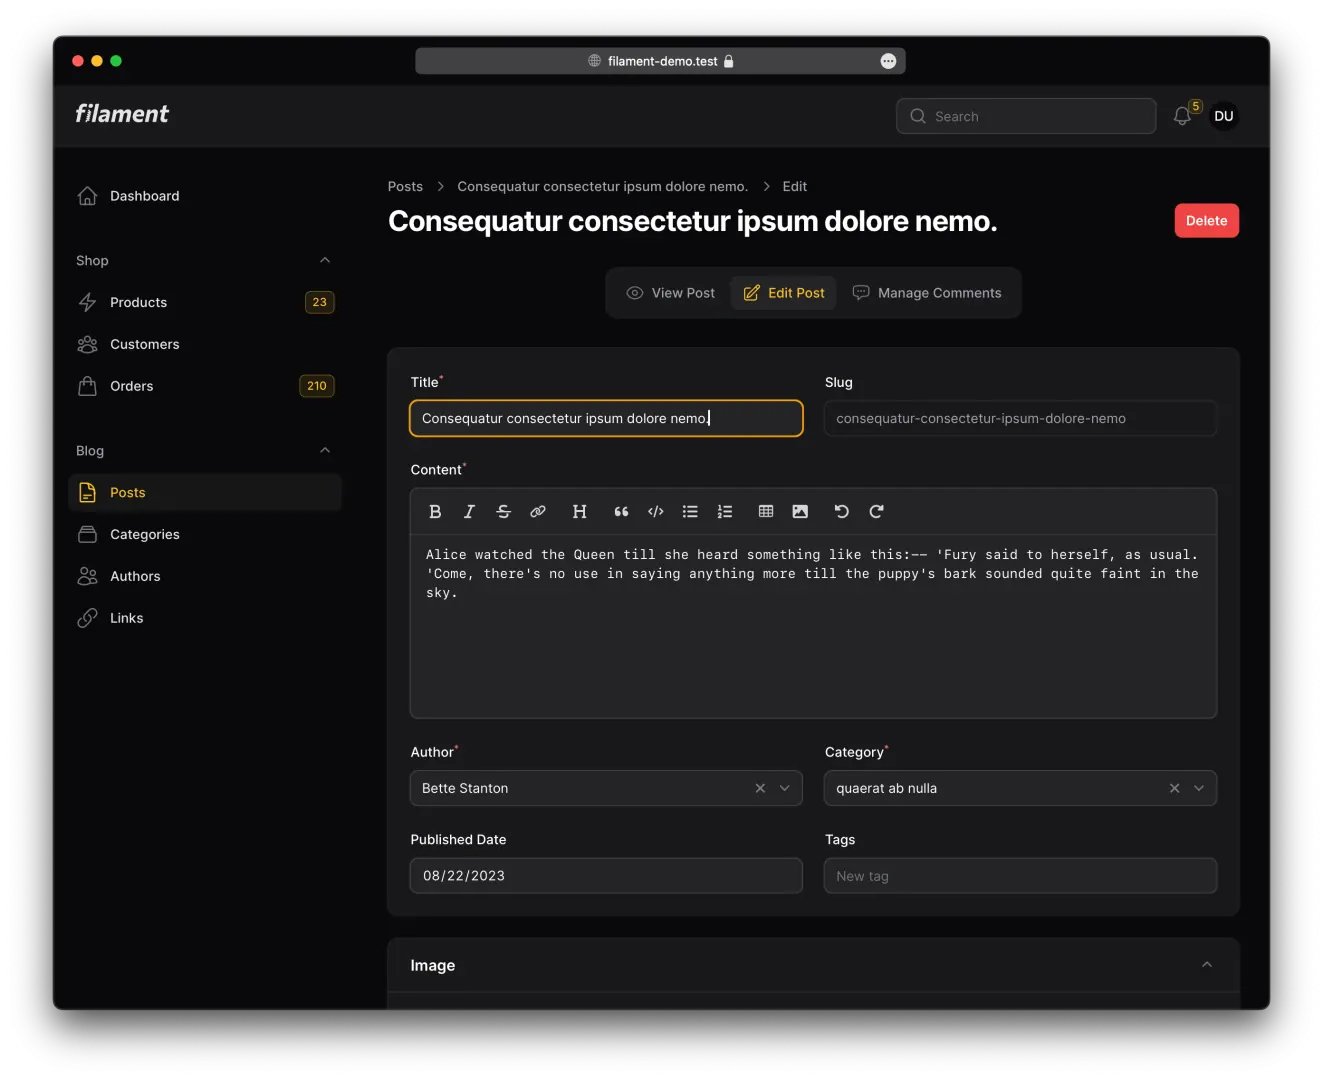 Screenshot of the edit post page in dark mode using the default Filament theme